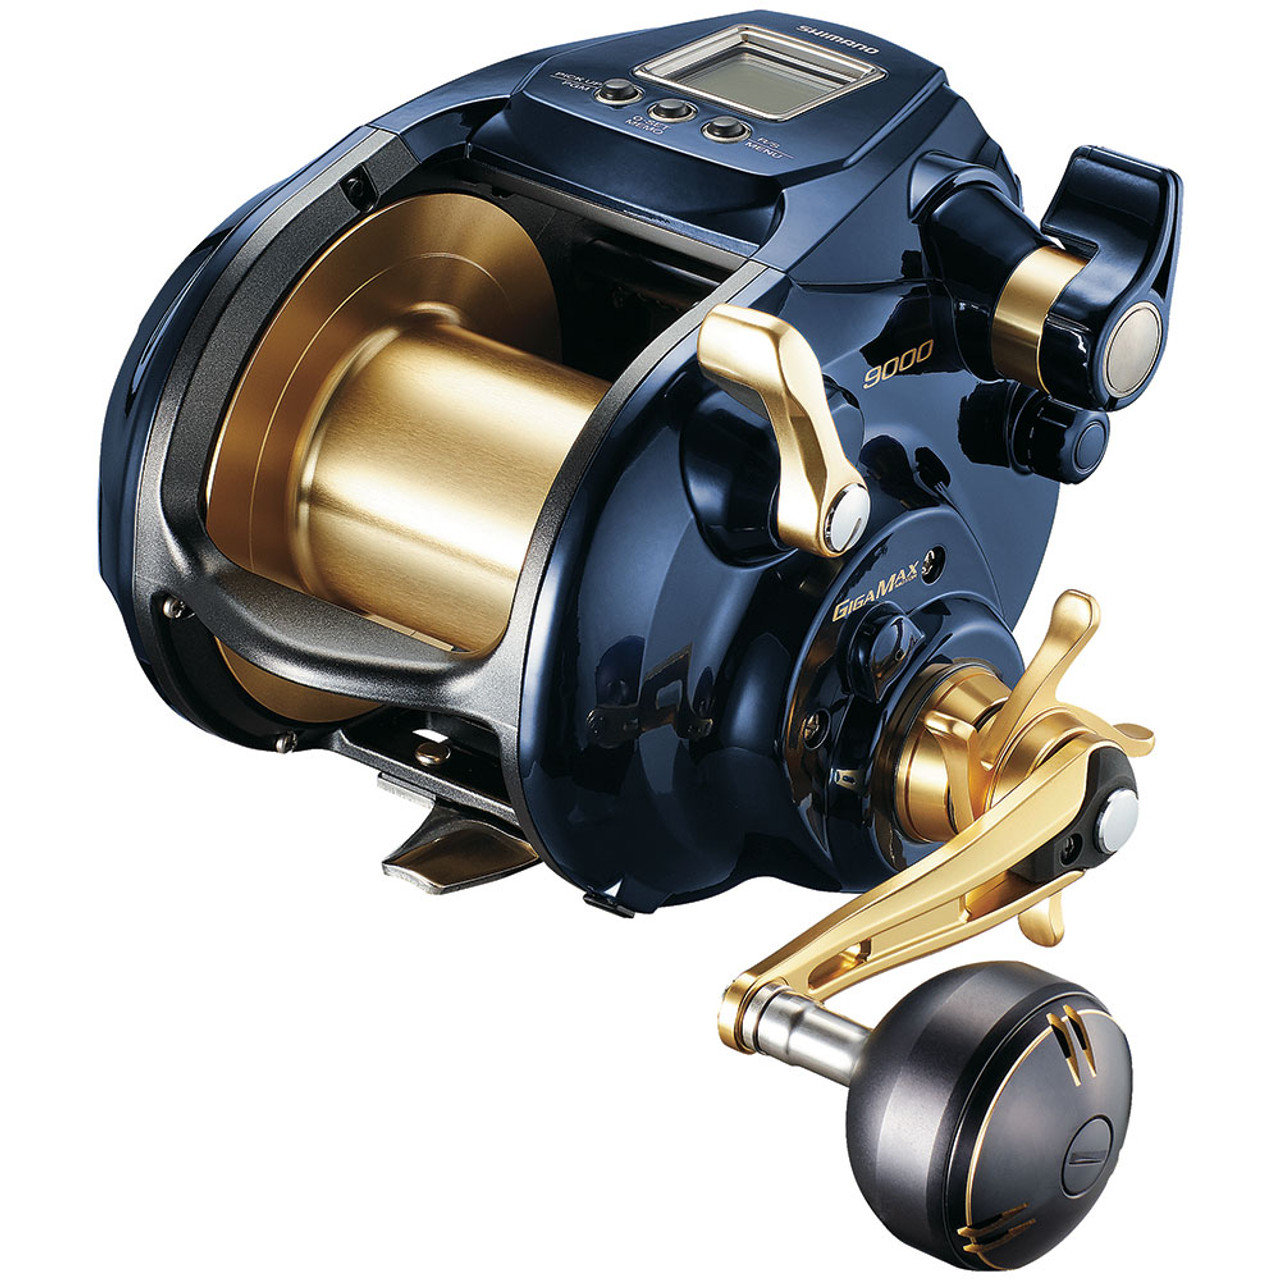 Tendy Style Shimano Beastmaster 9000 Electric Reel incredible prices at